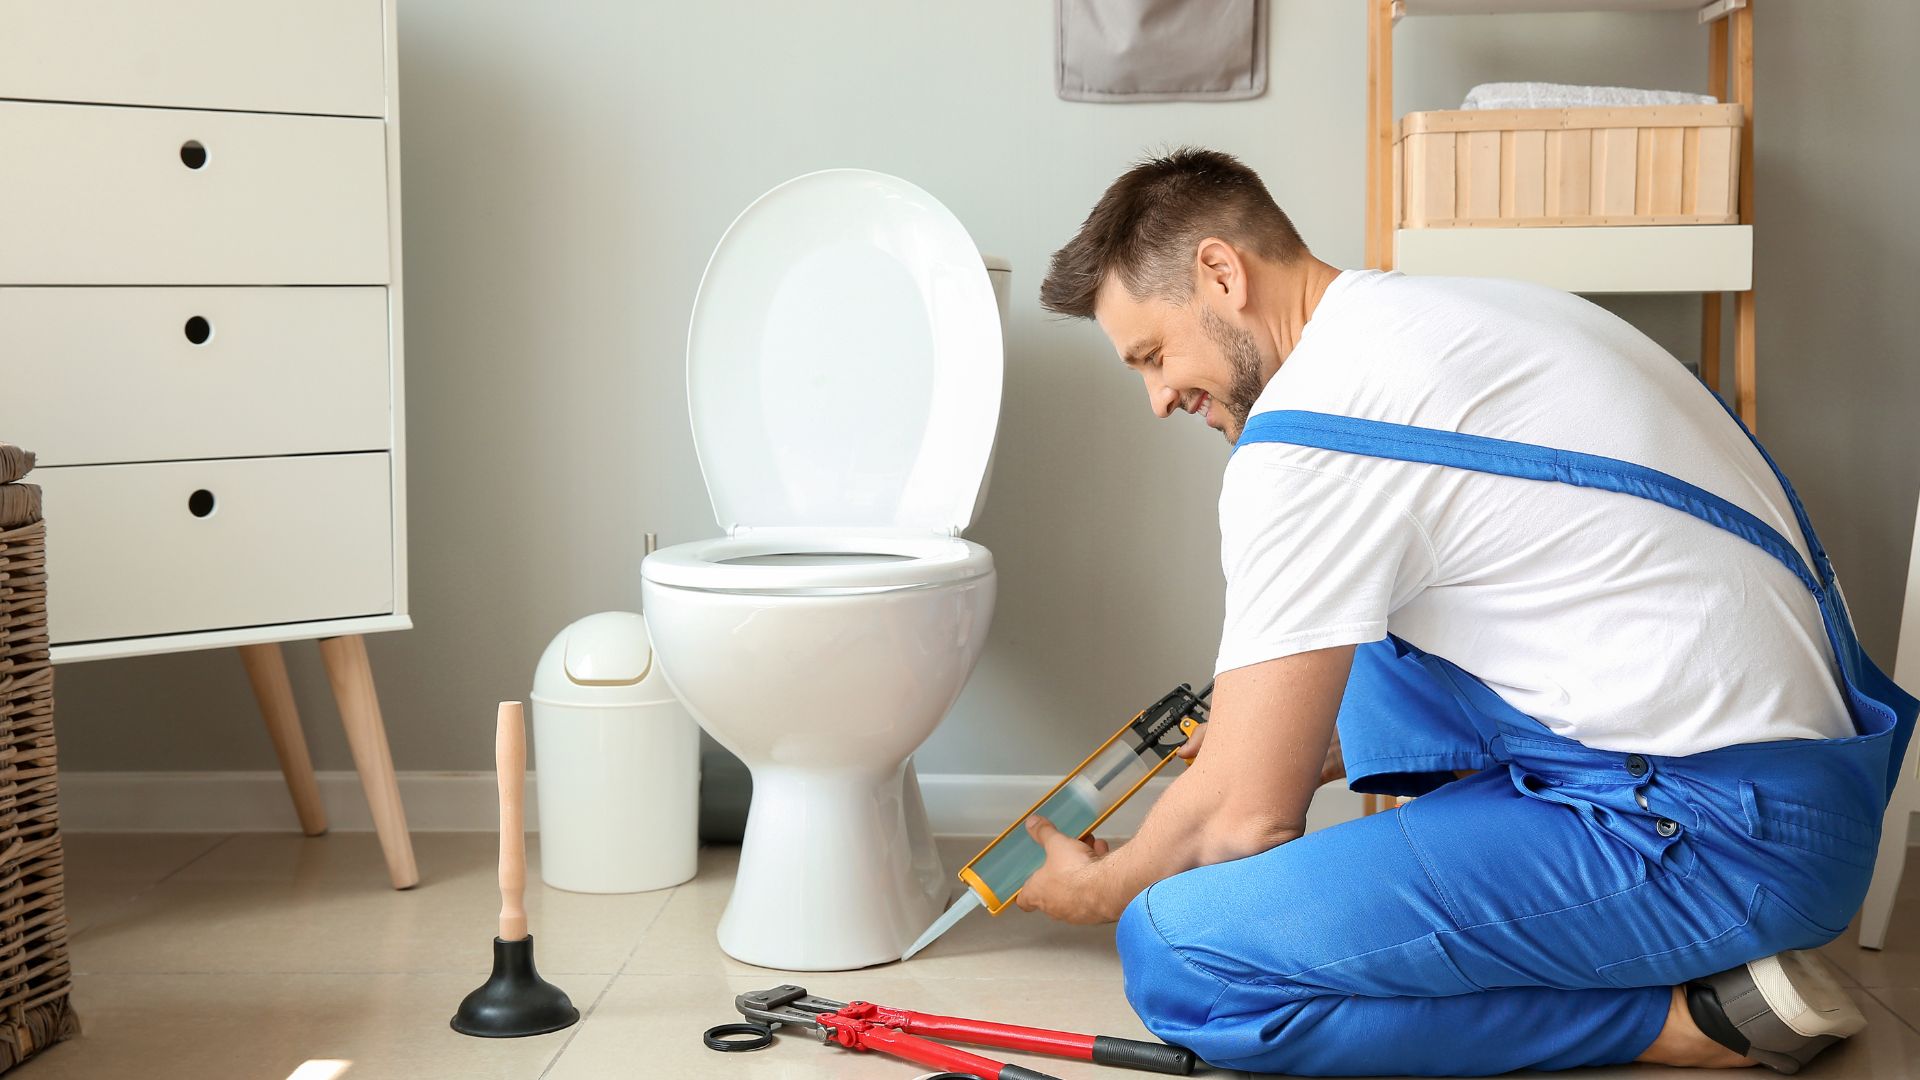 For all your toilet-related requirements, get in touch with CAN Plumbing and Drainage.